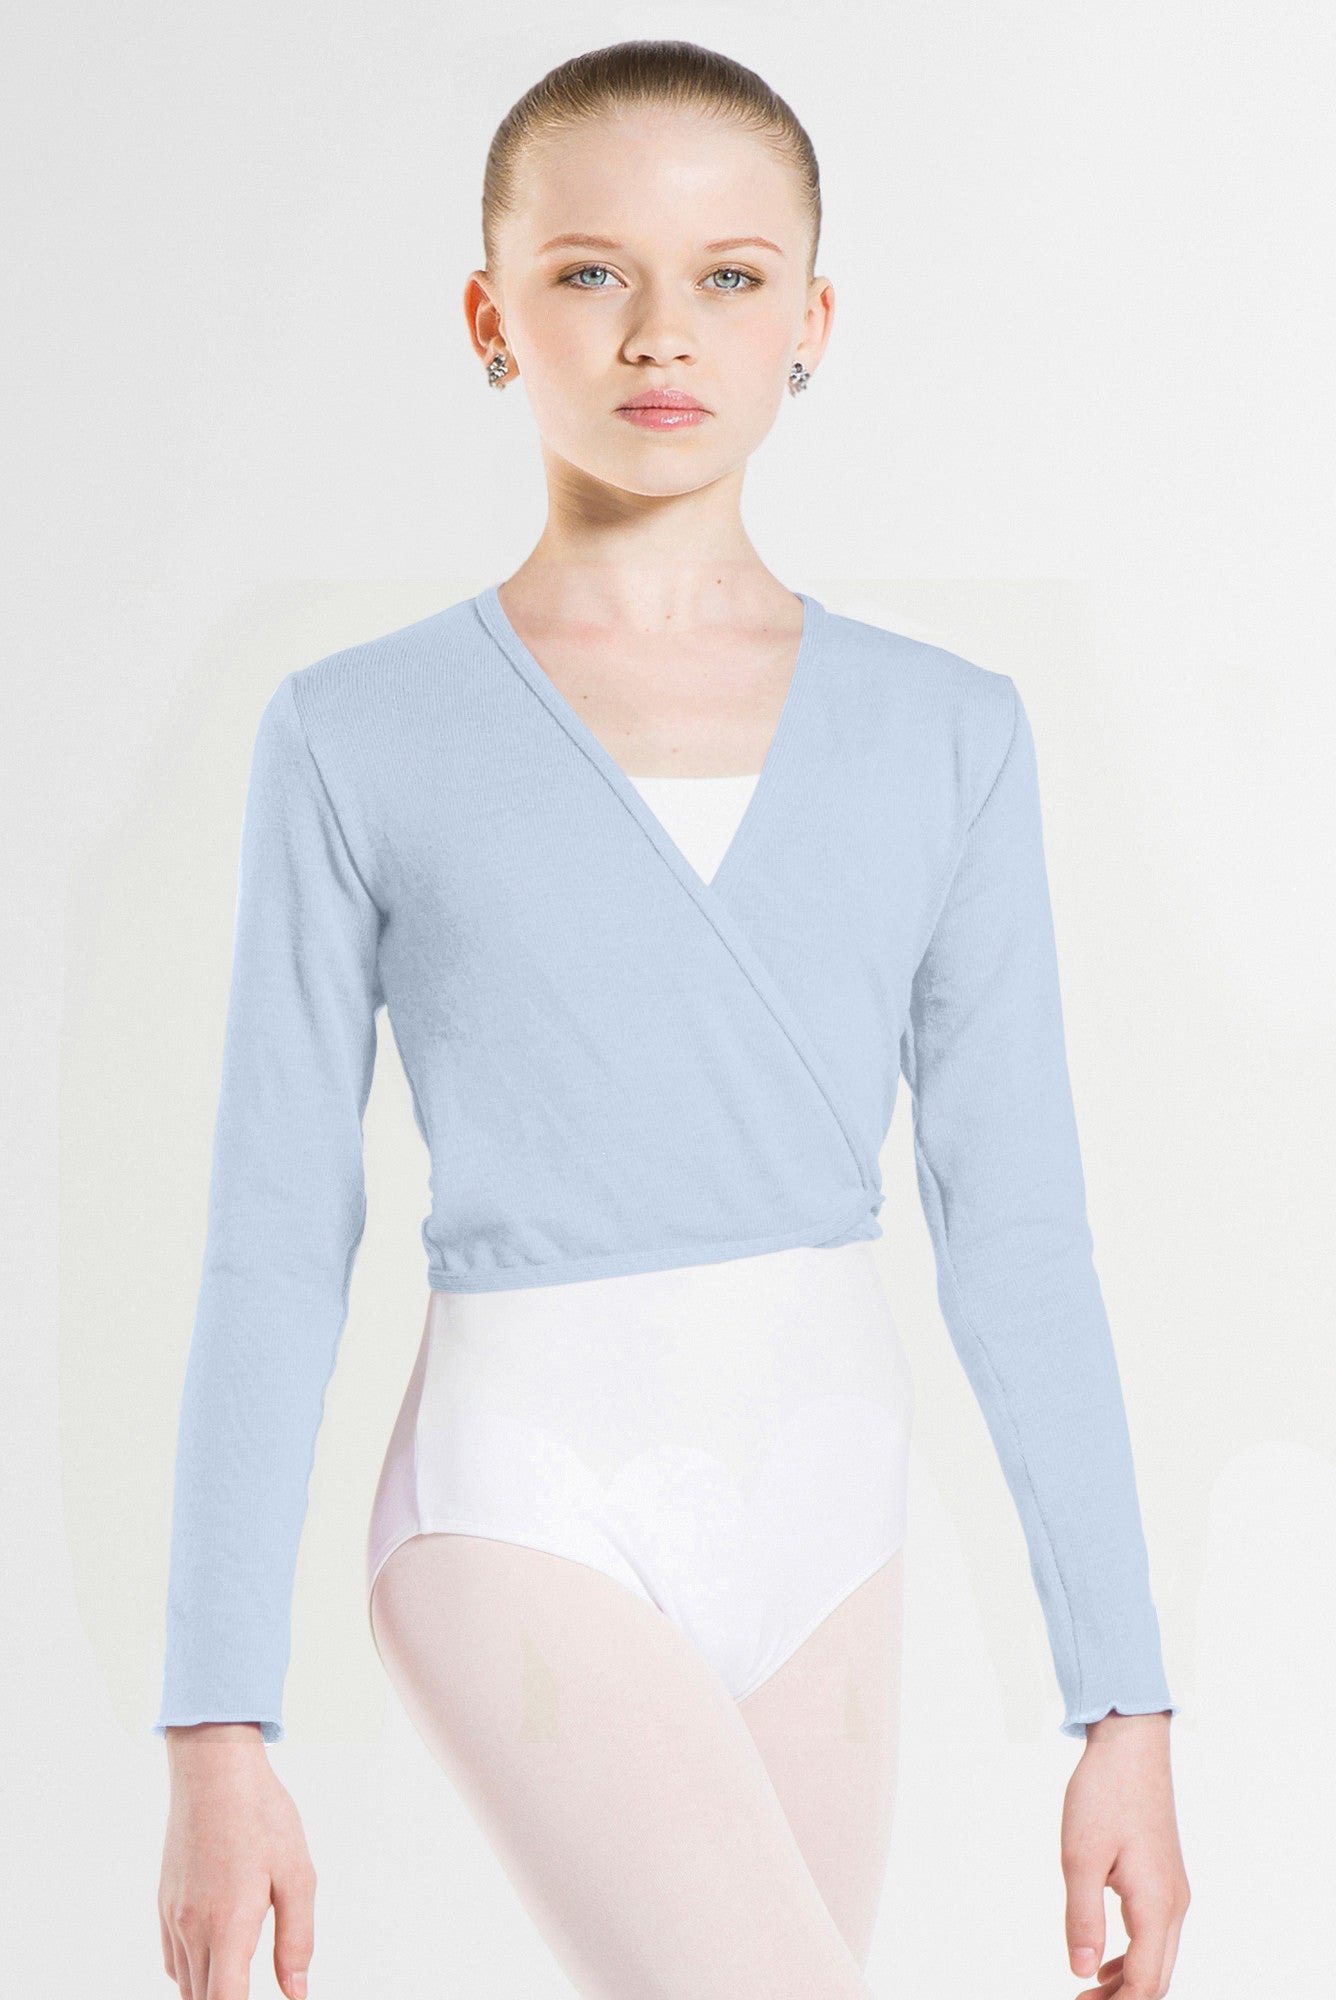 Menuet Wrap Sweater - Youth